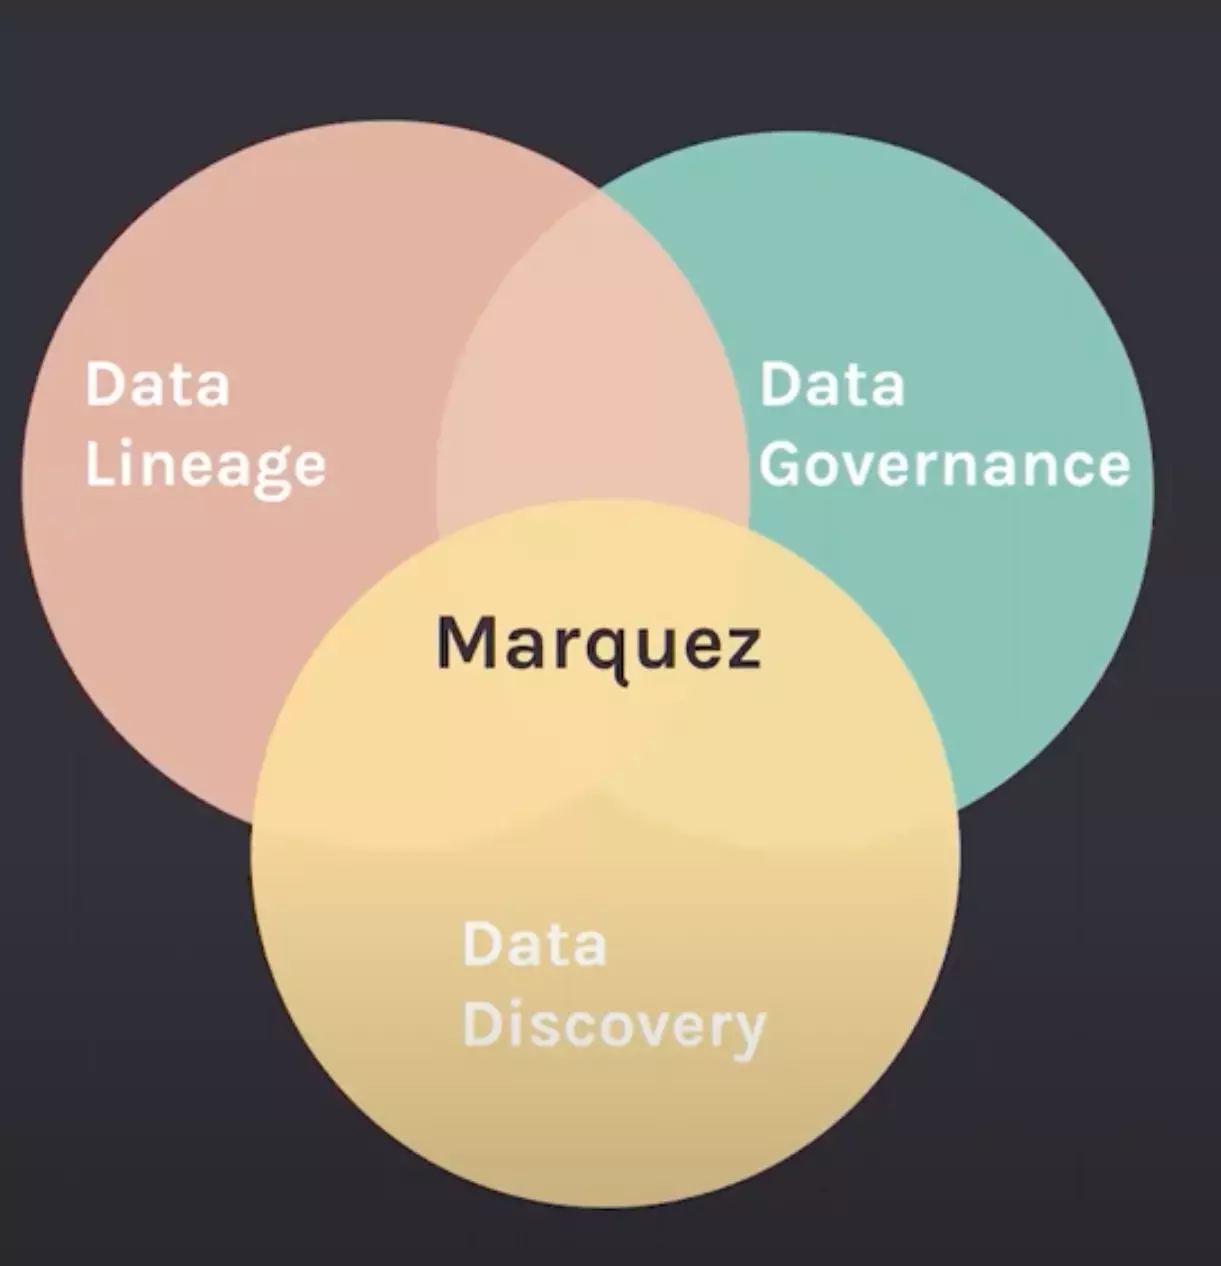 Marquez is at the heart of data discovery, lineage, and governance